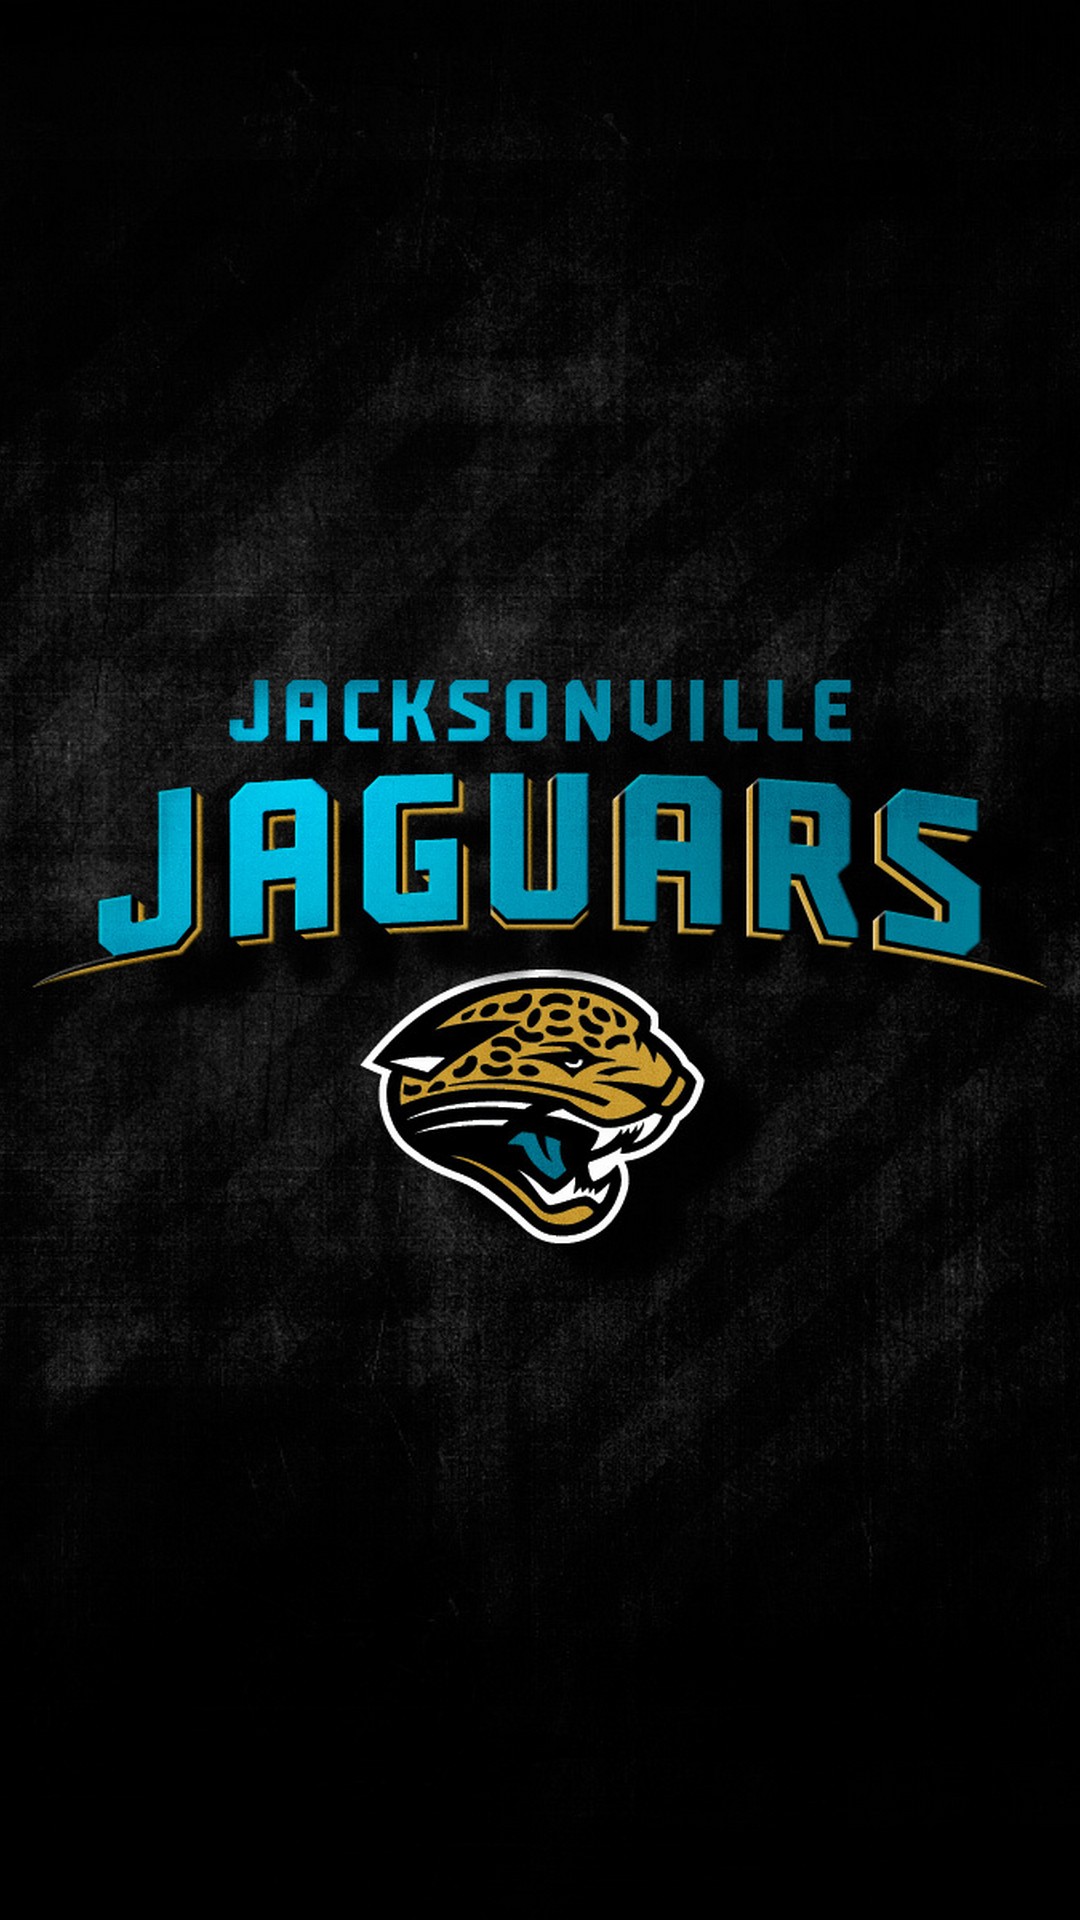 Jacksonville Jaguars iPhone 6 Wallpaper With high-resolution 1080X1920 pixel. You can use this wallpaper for your Mac or Windows Desktop Background, iPhone, Android or Tablet and another Smartphone device